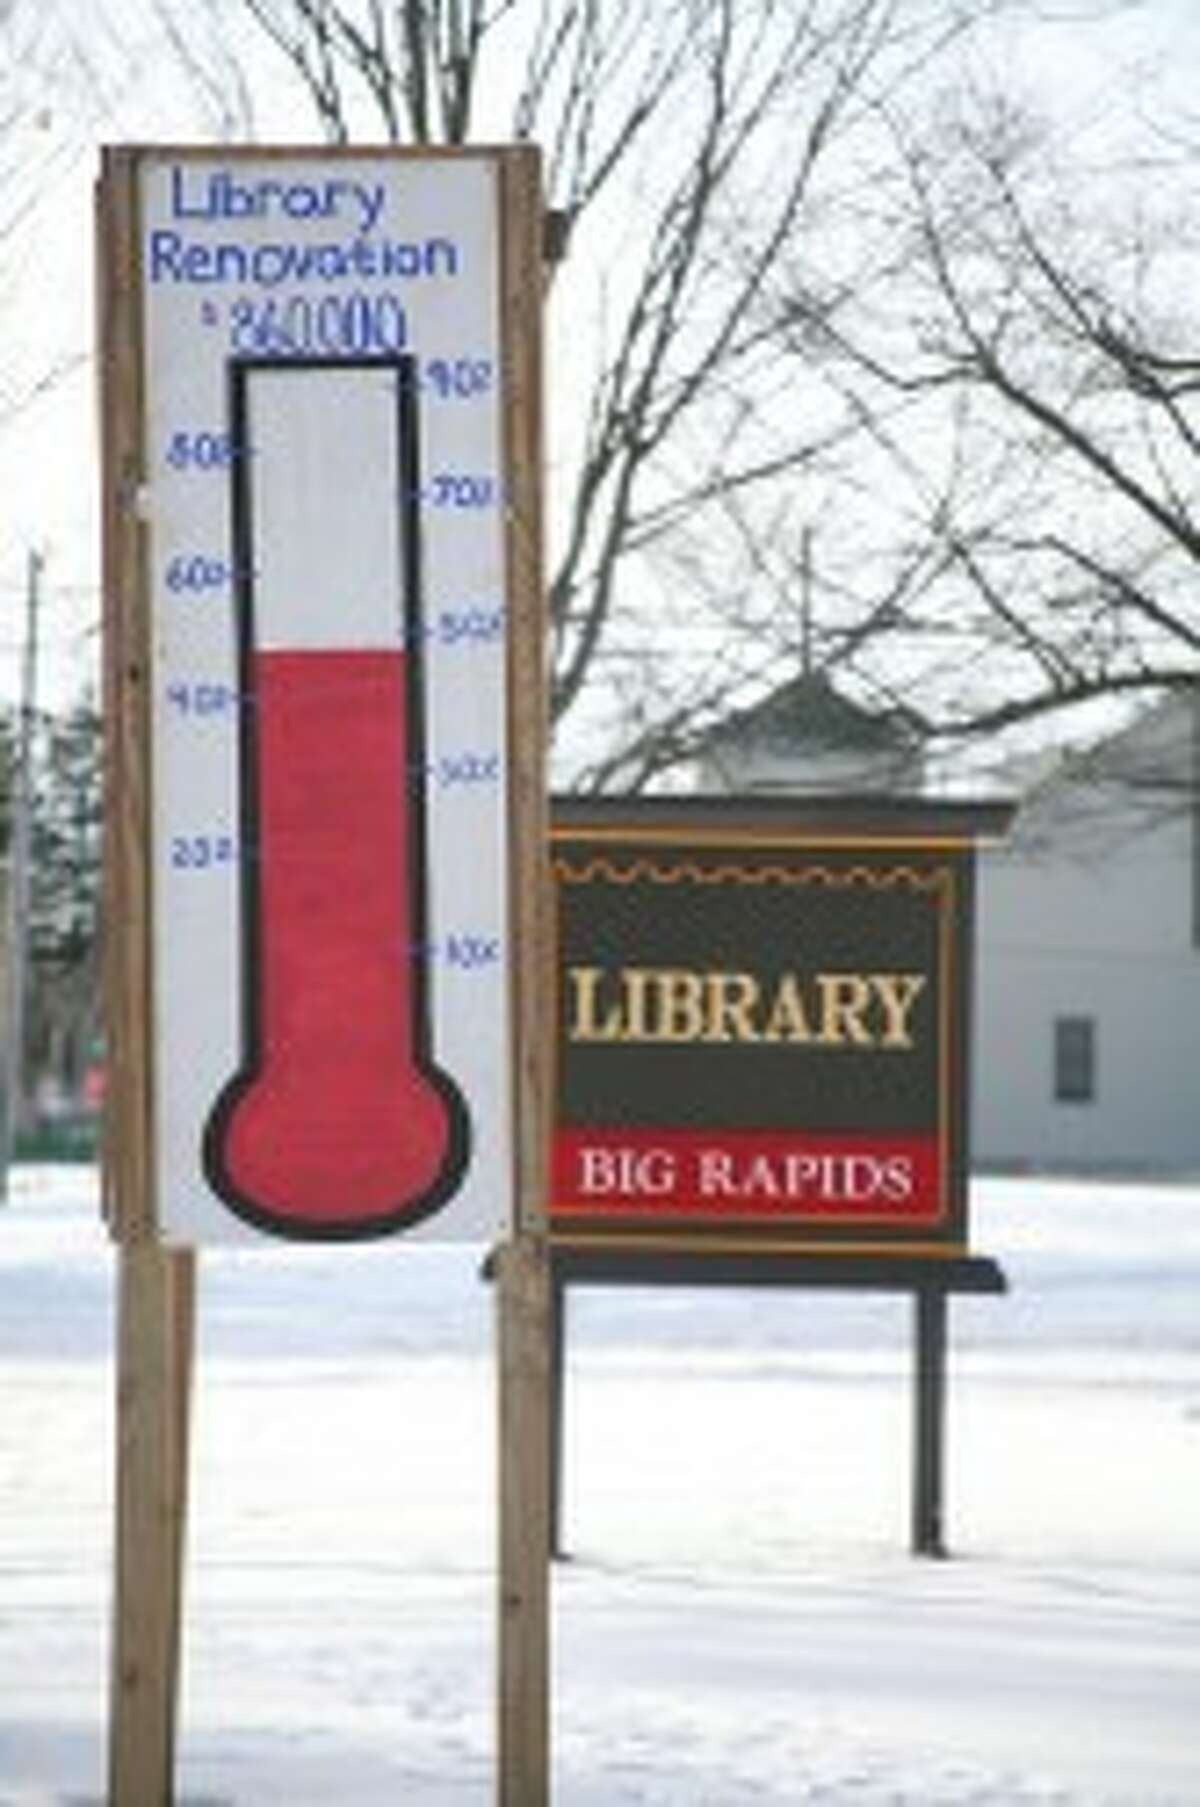 FUNDRAISING: The city is asking seven partnering townships to honor their portion of library service contracts. The money will go toward the $860,000 library renovation project. Collectively, the townships owe about $225,000.